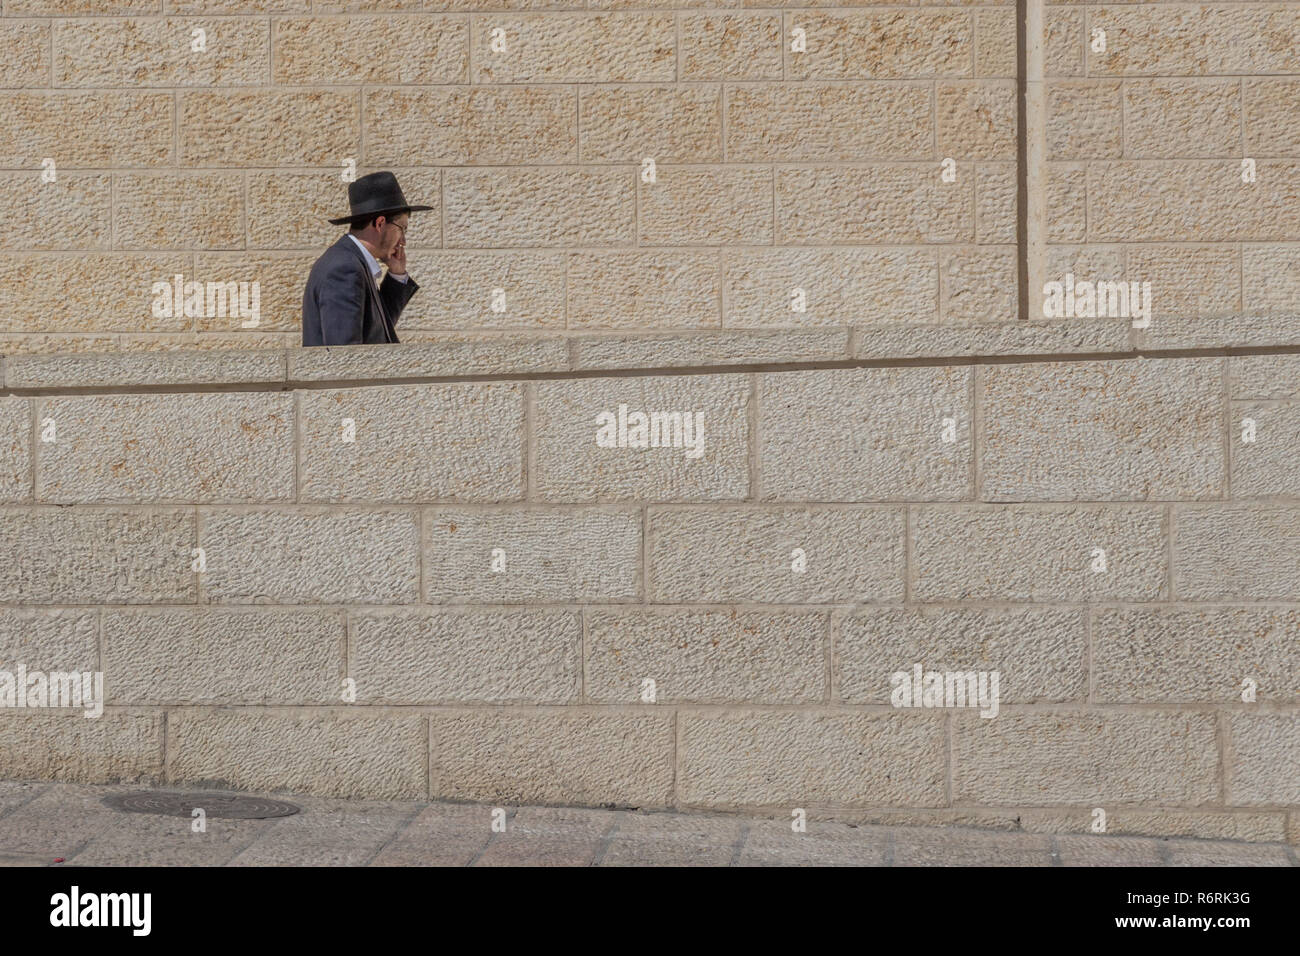 Orthodox Jewish man near the Western wall or Wailing wall, old city of Jerusalem, Israel, Middle East Stock Photo